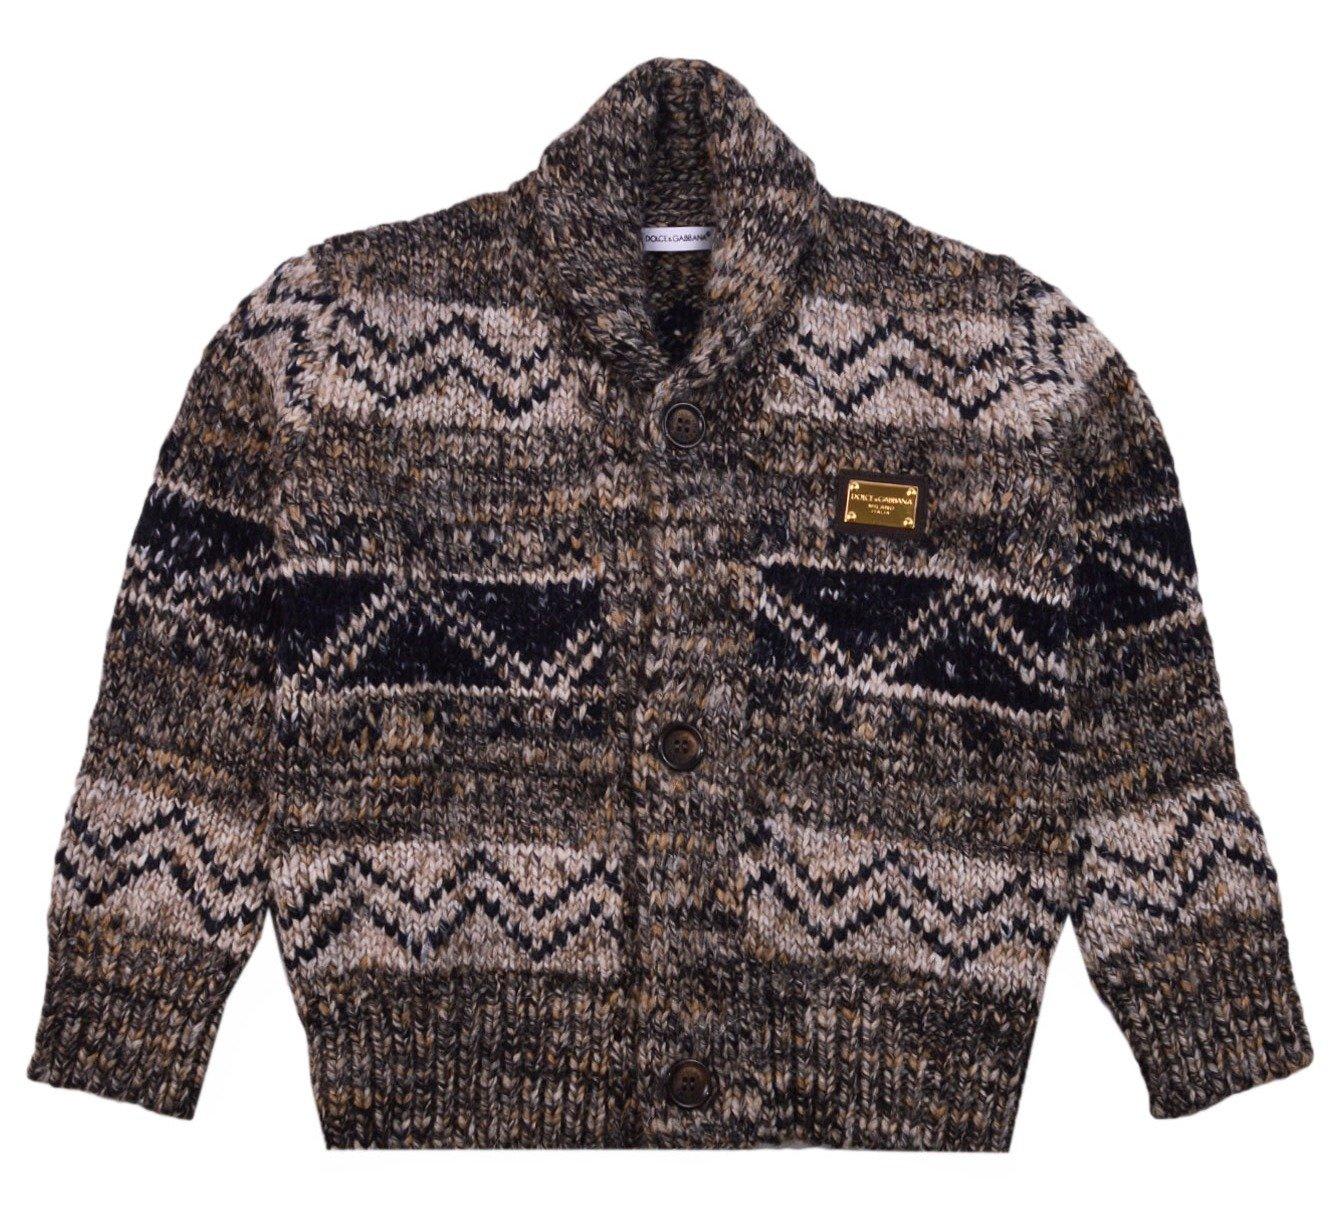 DOLCE & GABBANA PATTERNED INTARSIA KNITTED CARDIGAN